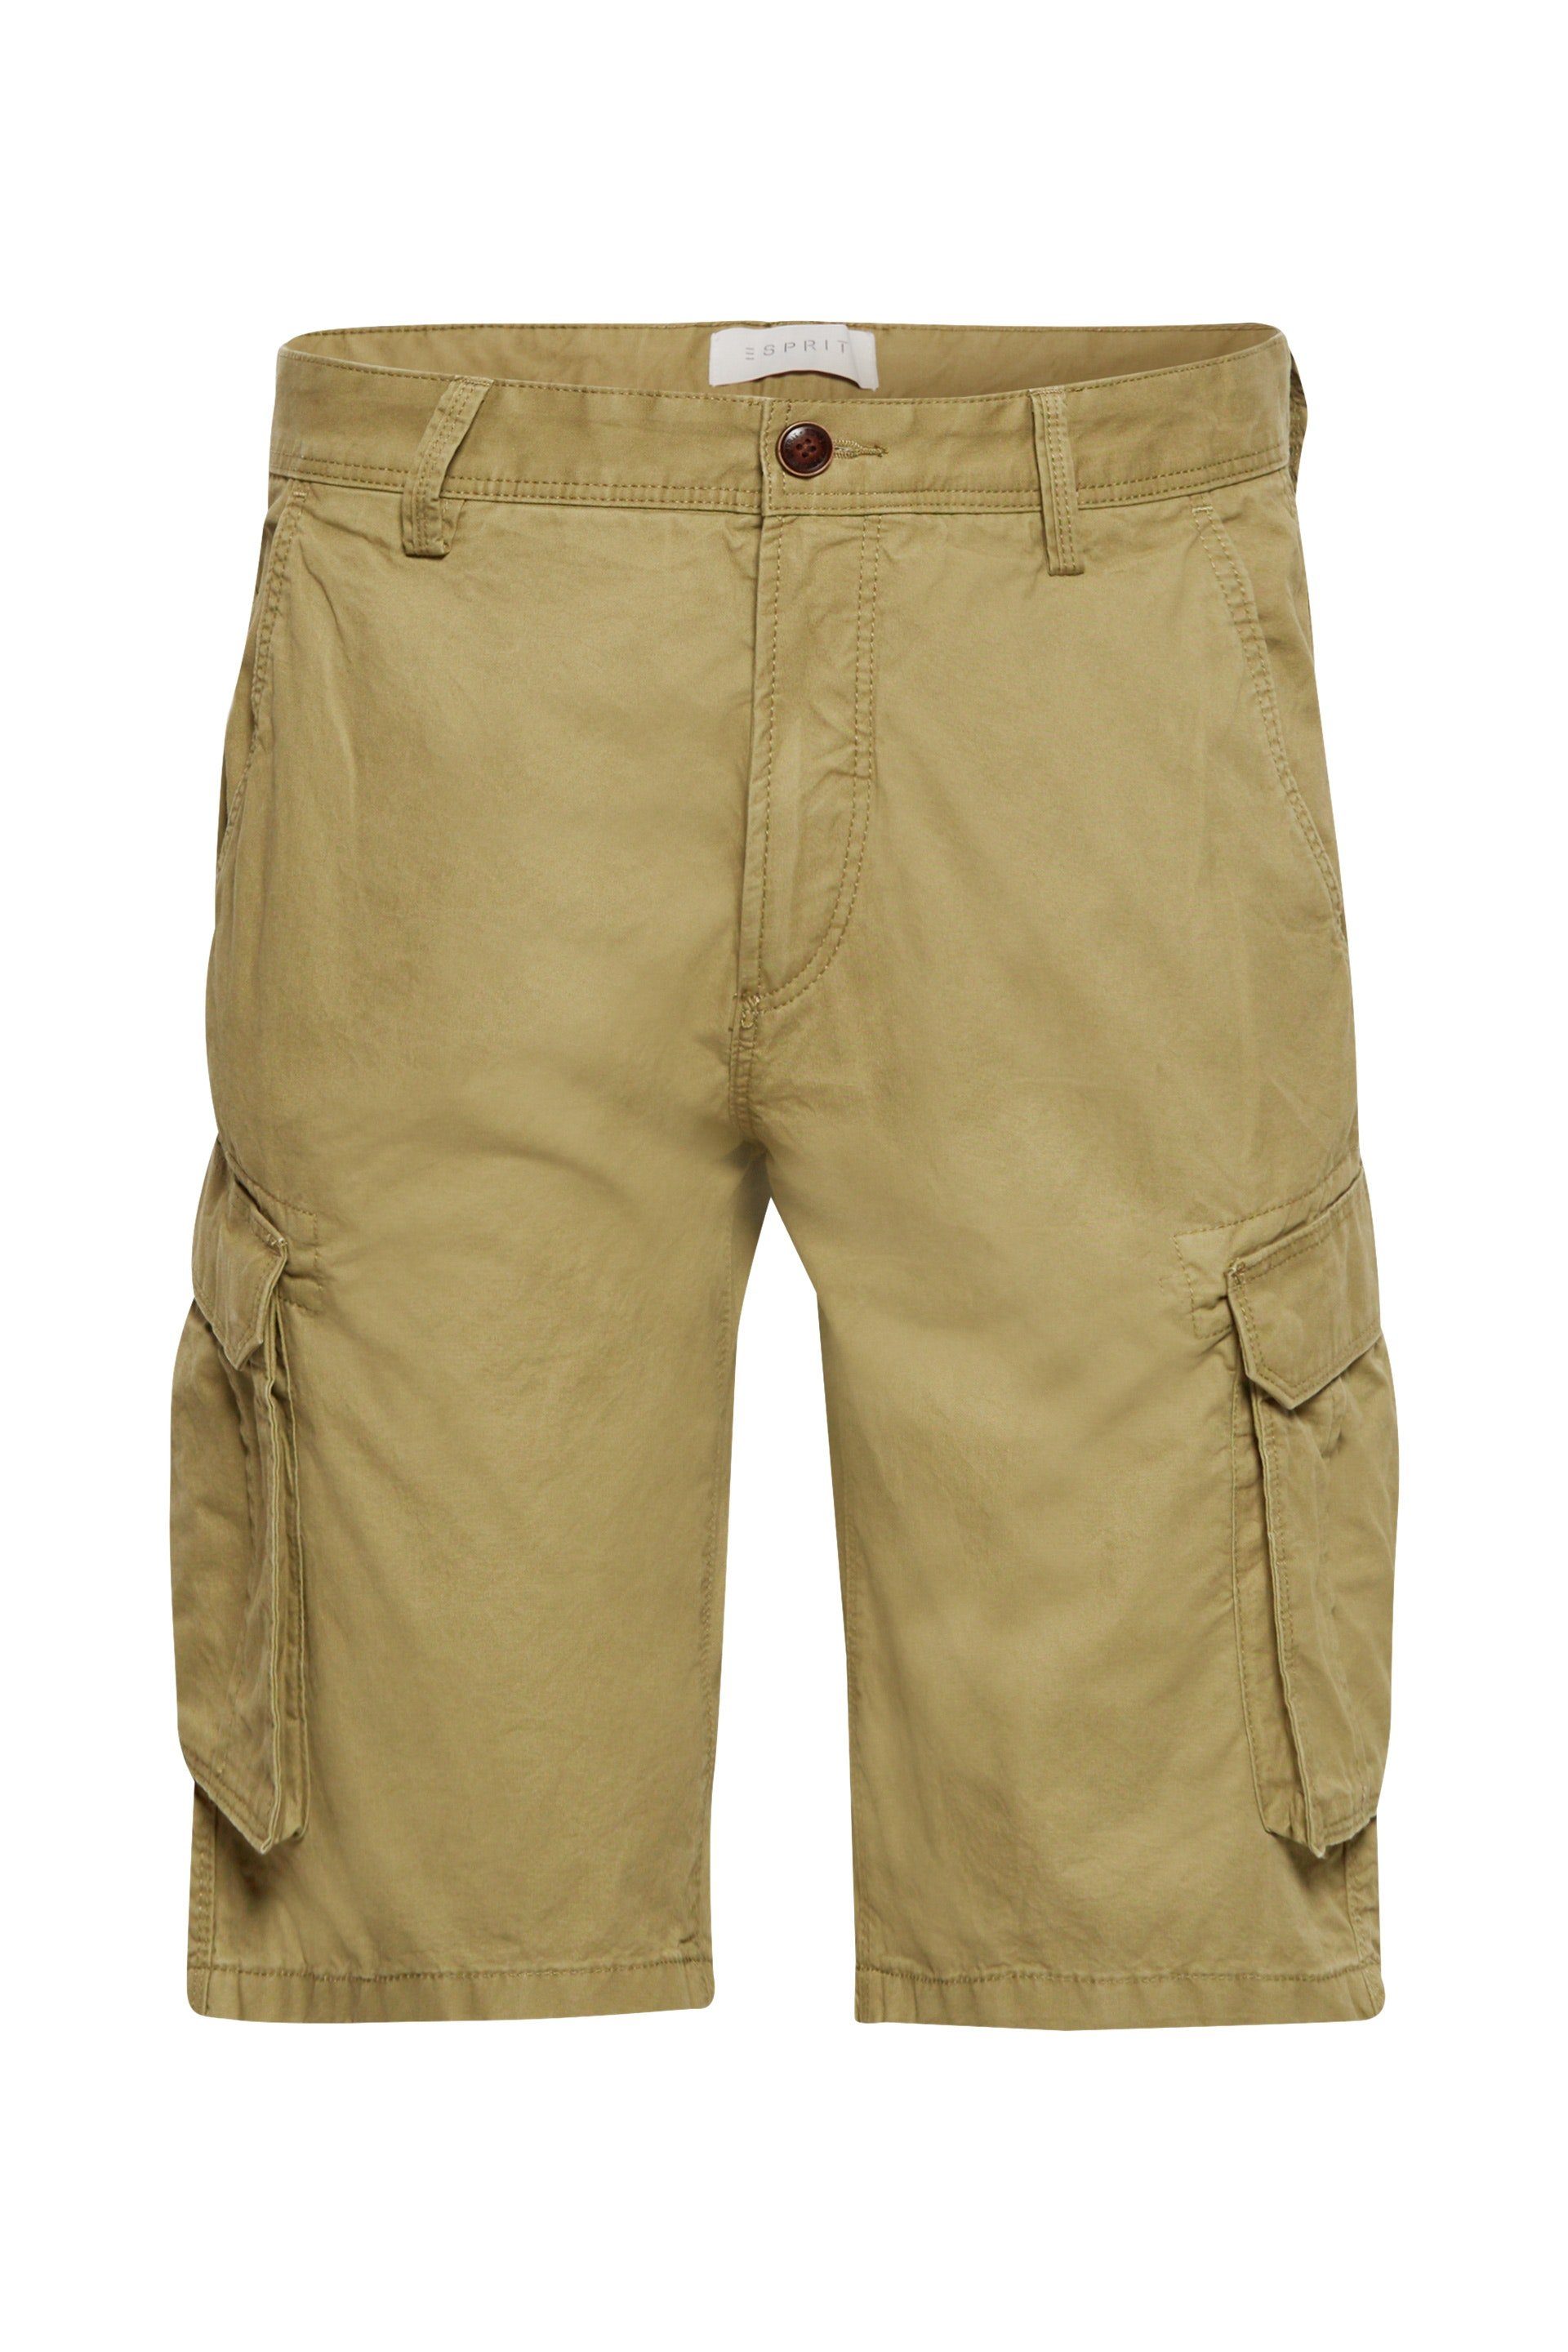 Esprit OLIVE Shorts Collection